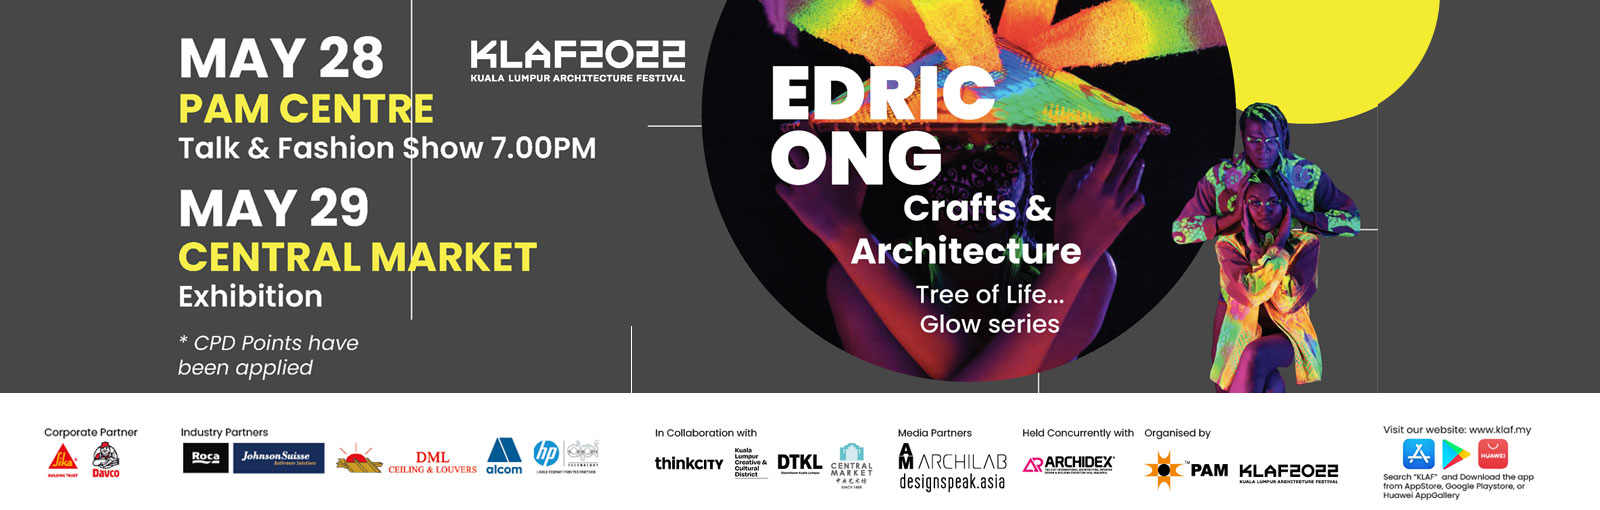 KLAF 2022: Edric Ong - Crafts & Architecture, Tree of Life... Glow Series